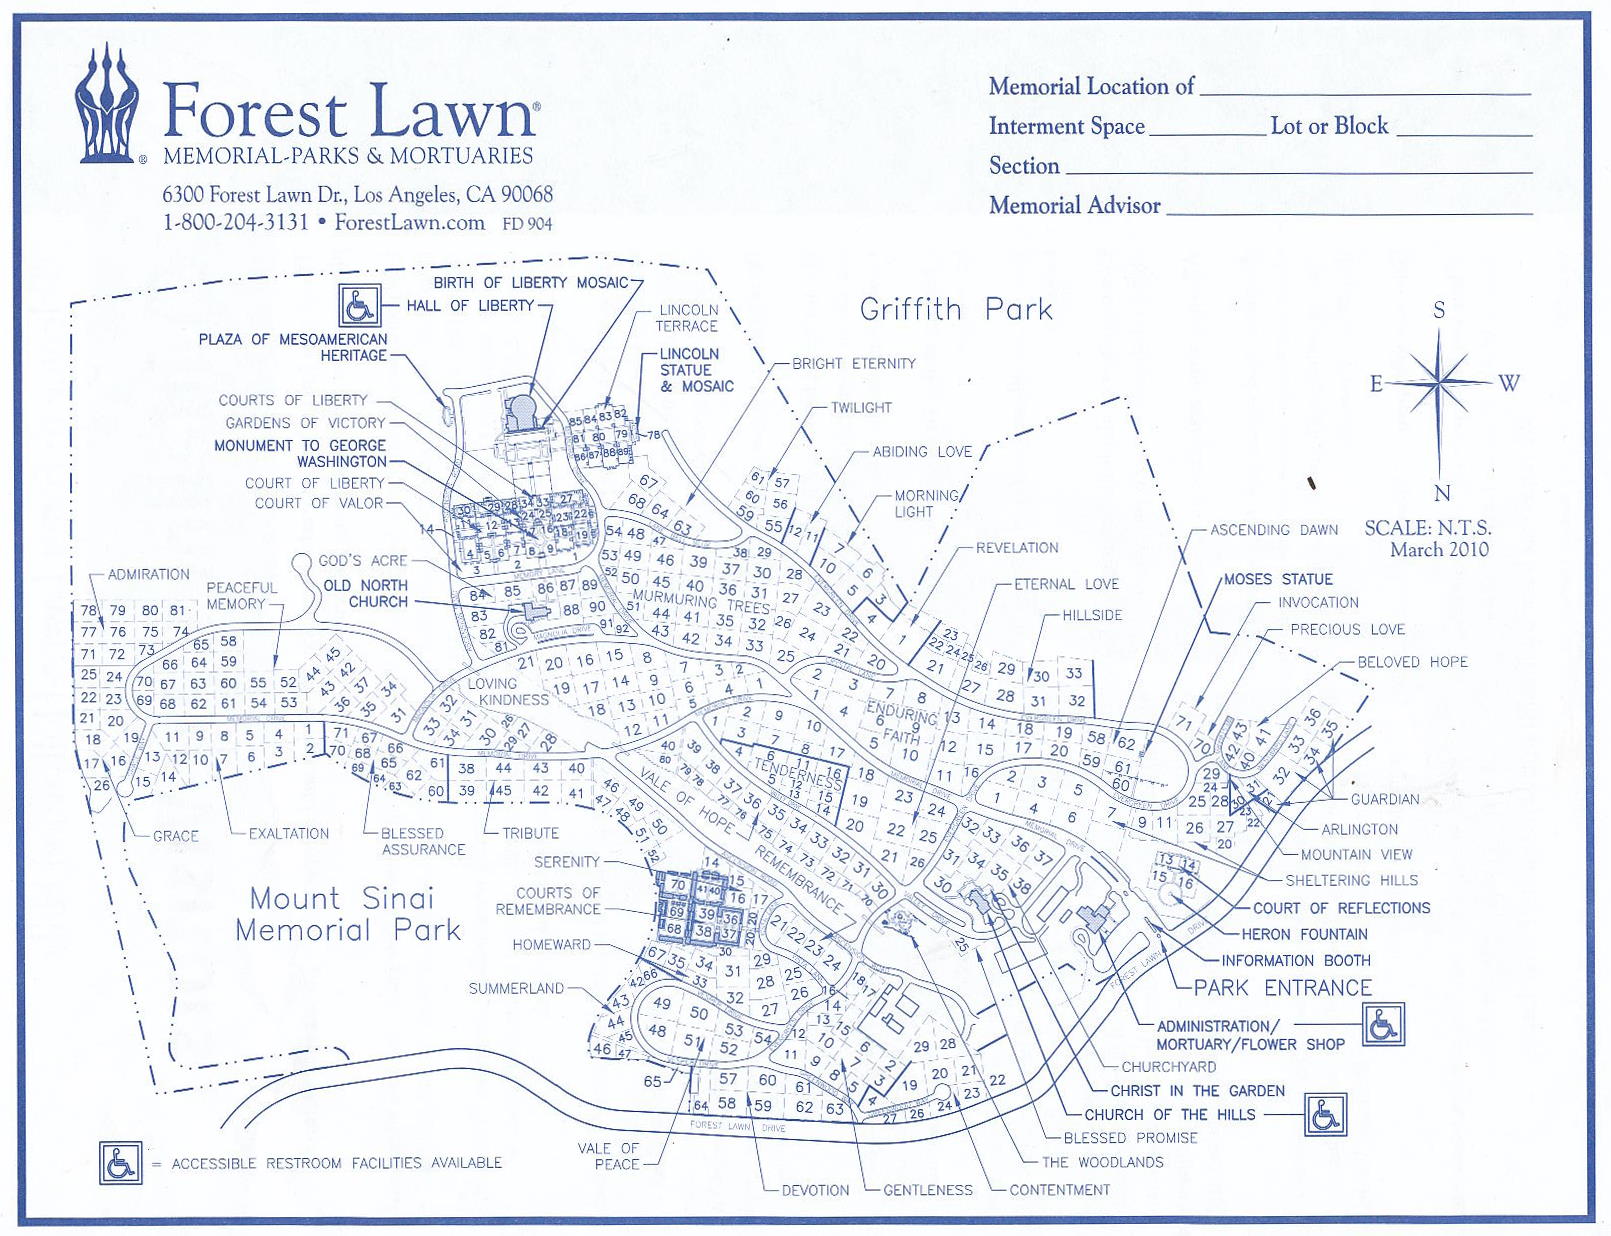 Map of Forest Lawn Memorial Park in Hollywood Hills, Los Angeles, California.